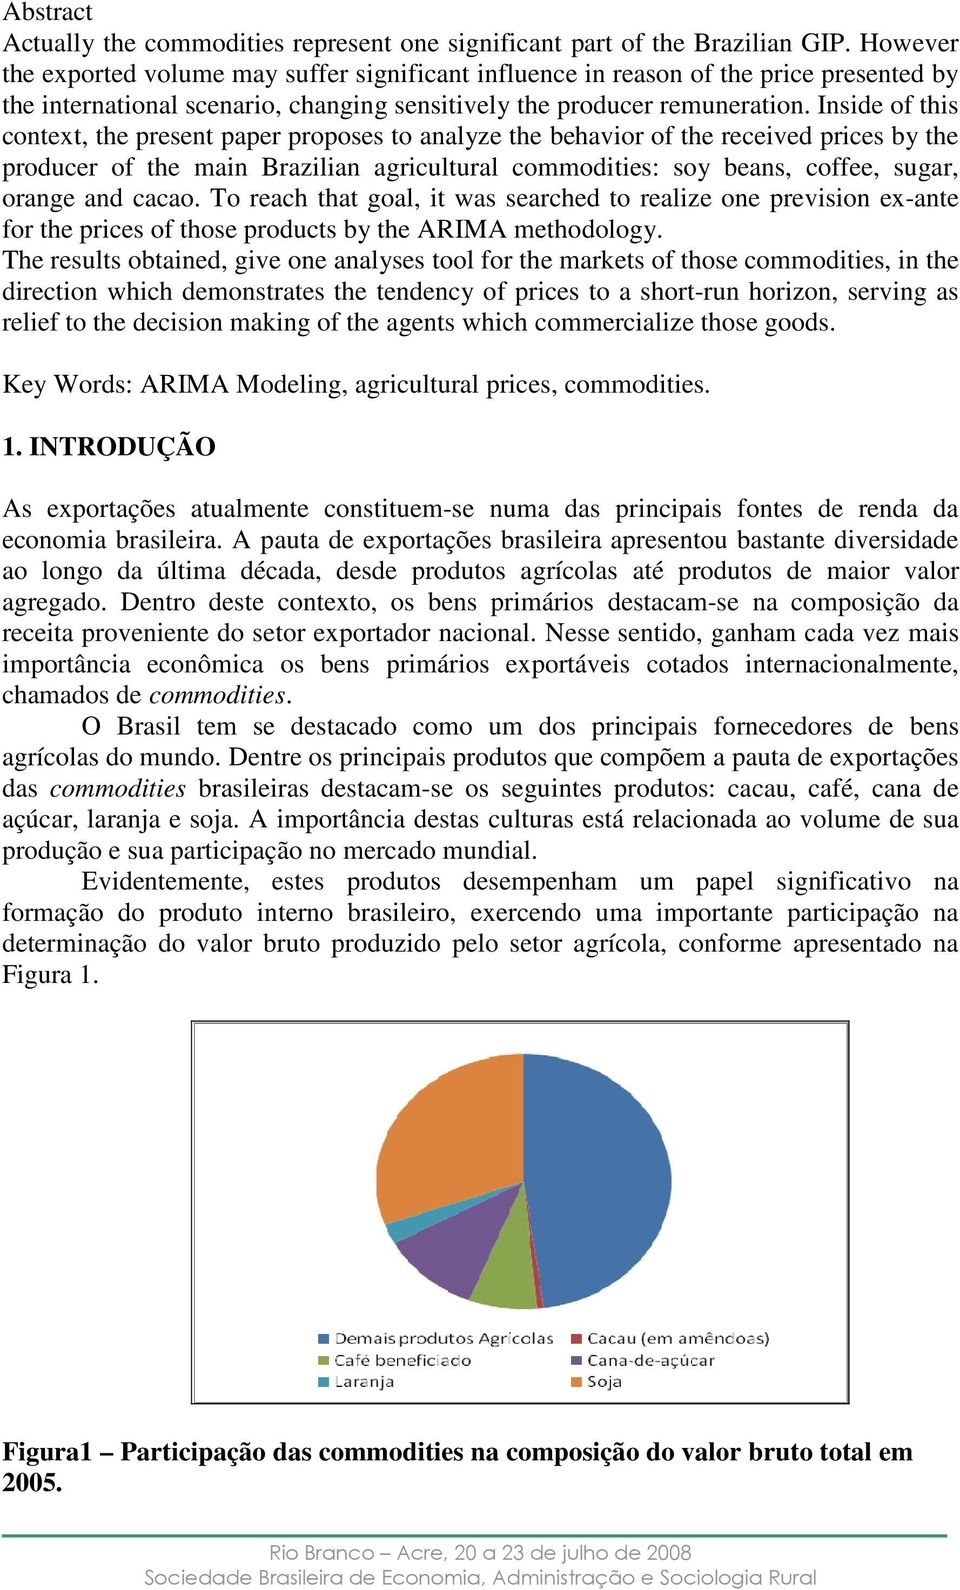 Inside of his conex, he presen paper proposes o analyze he behavior of he received prices by he producer of he main Brazilian agriculural commodiies: soy beans, coffee, sugar, orange and cacao.